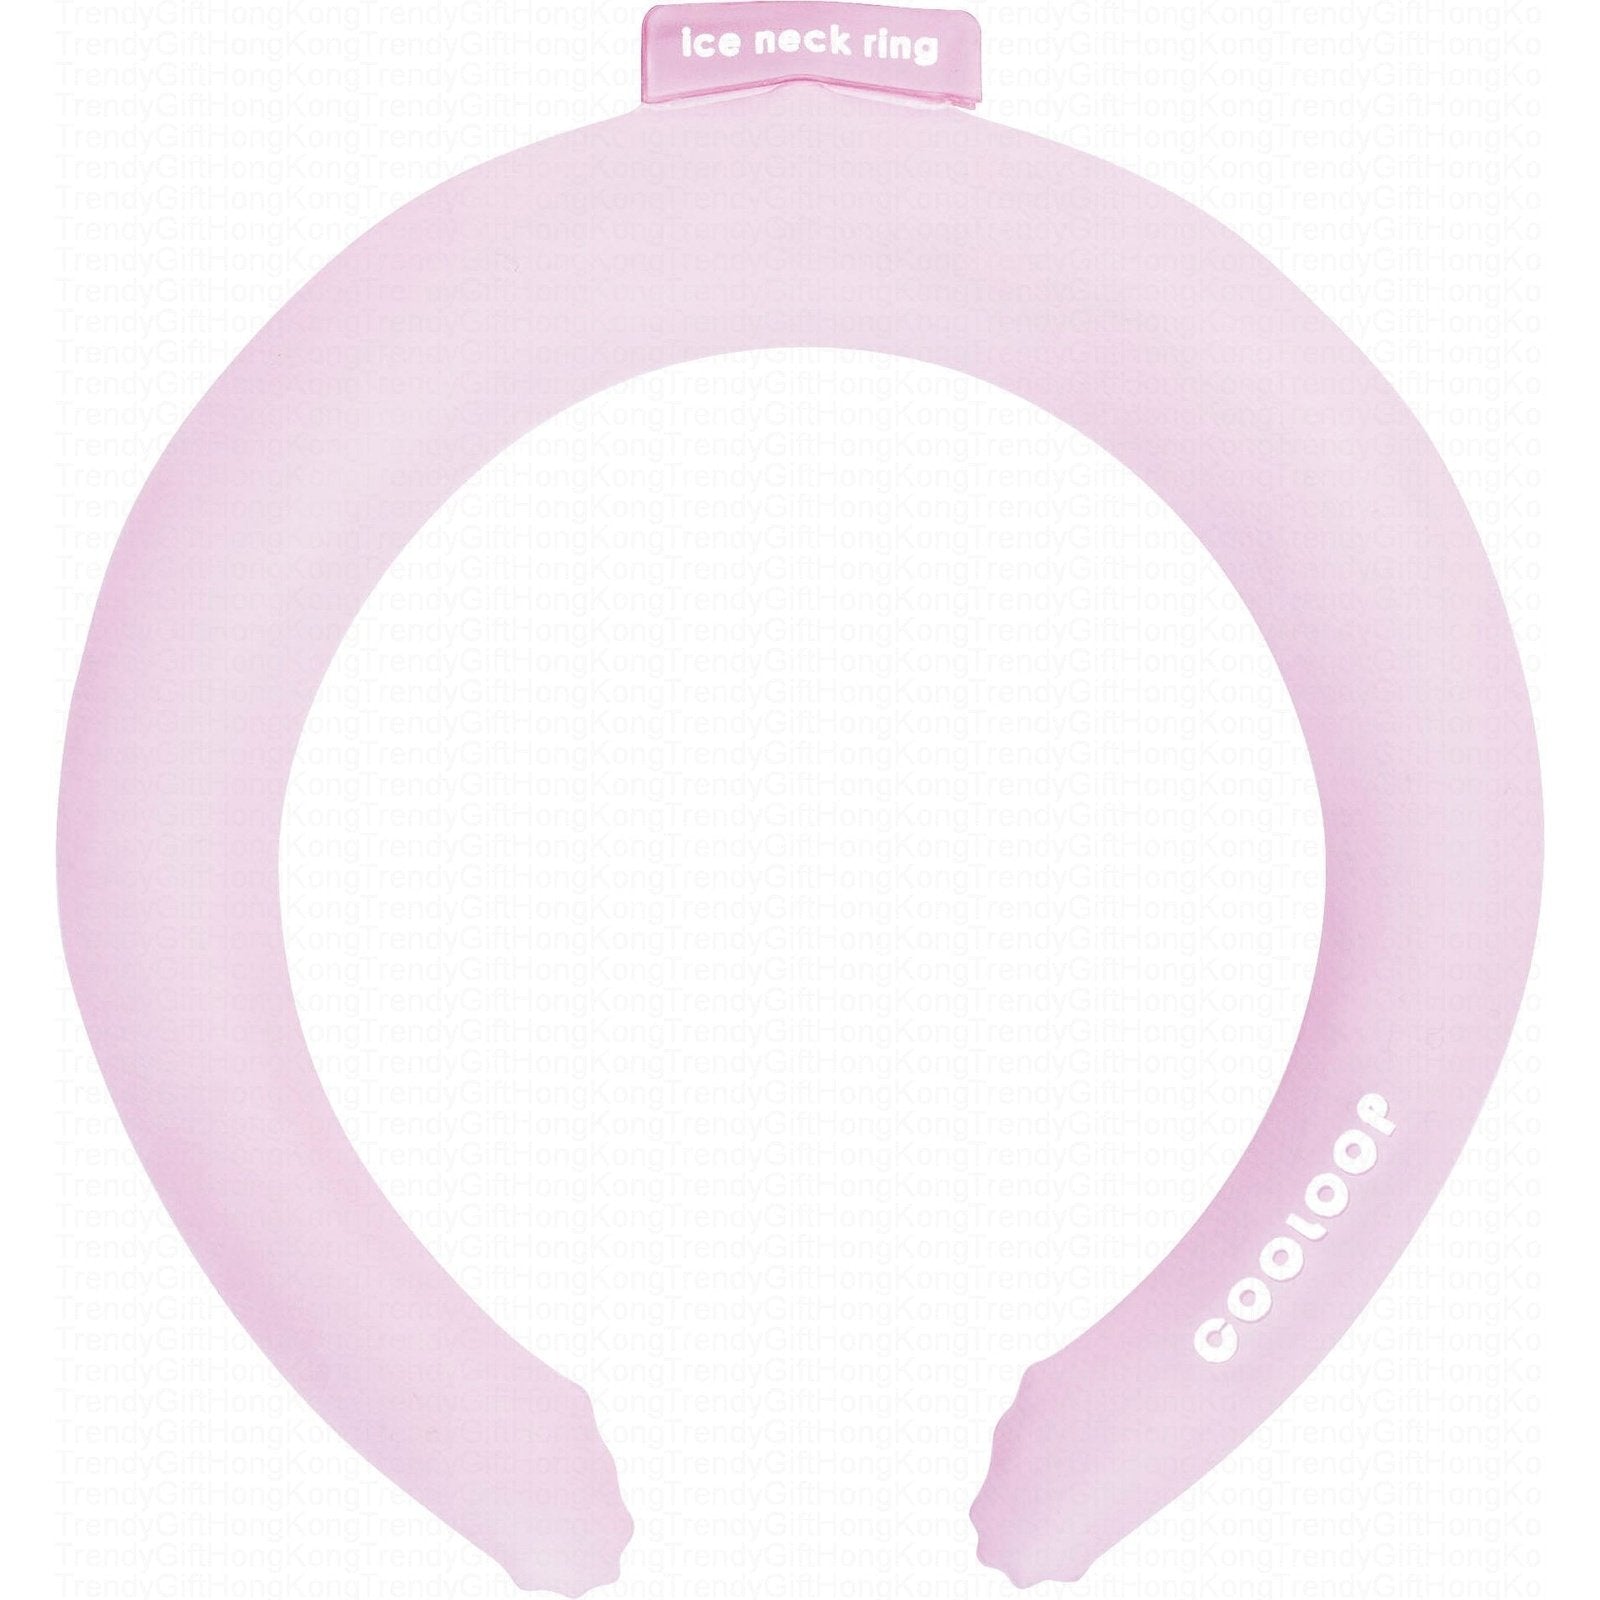 Cogit COOLOOP Ice Condensing Neck Ring - Instant Cooling - Beige/Pink/Blue/Clear trendygifthk